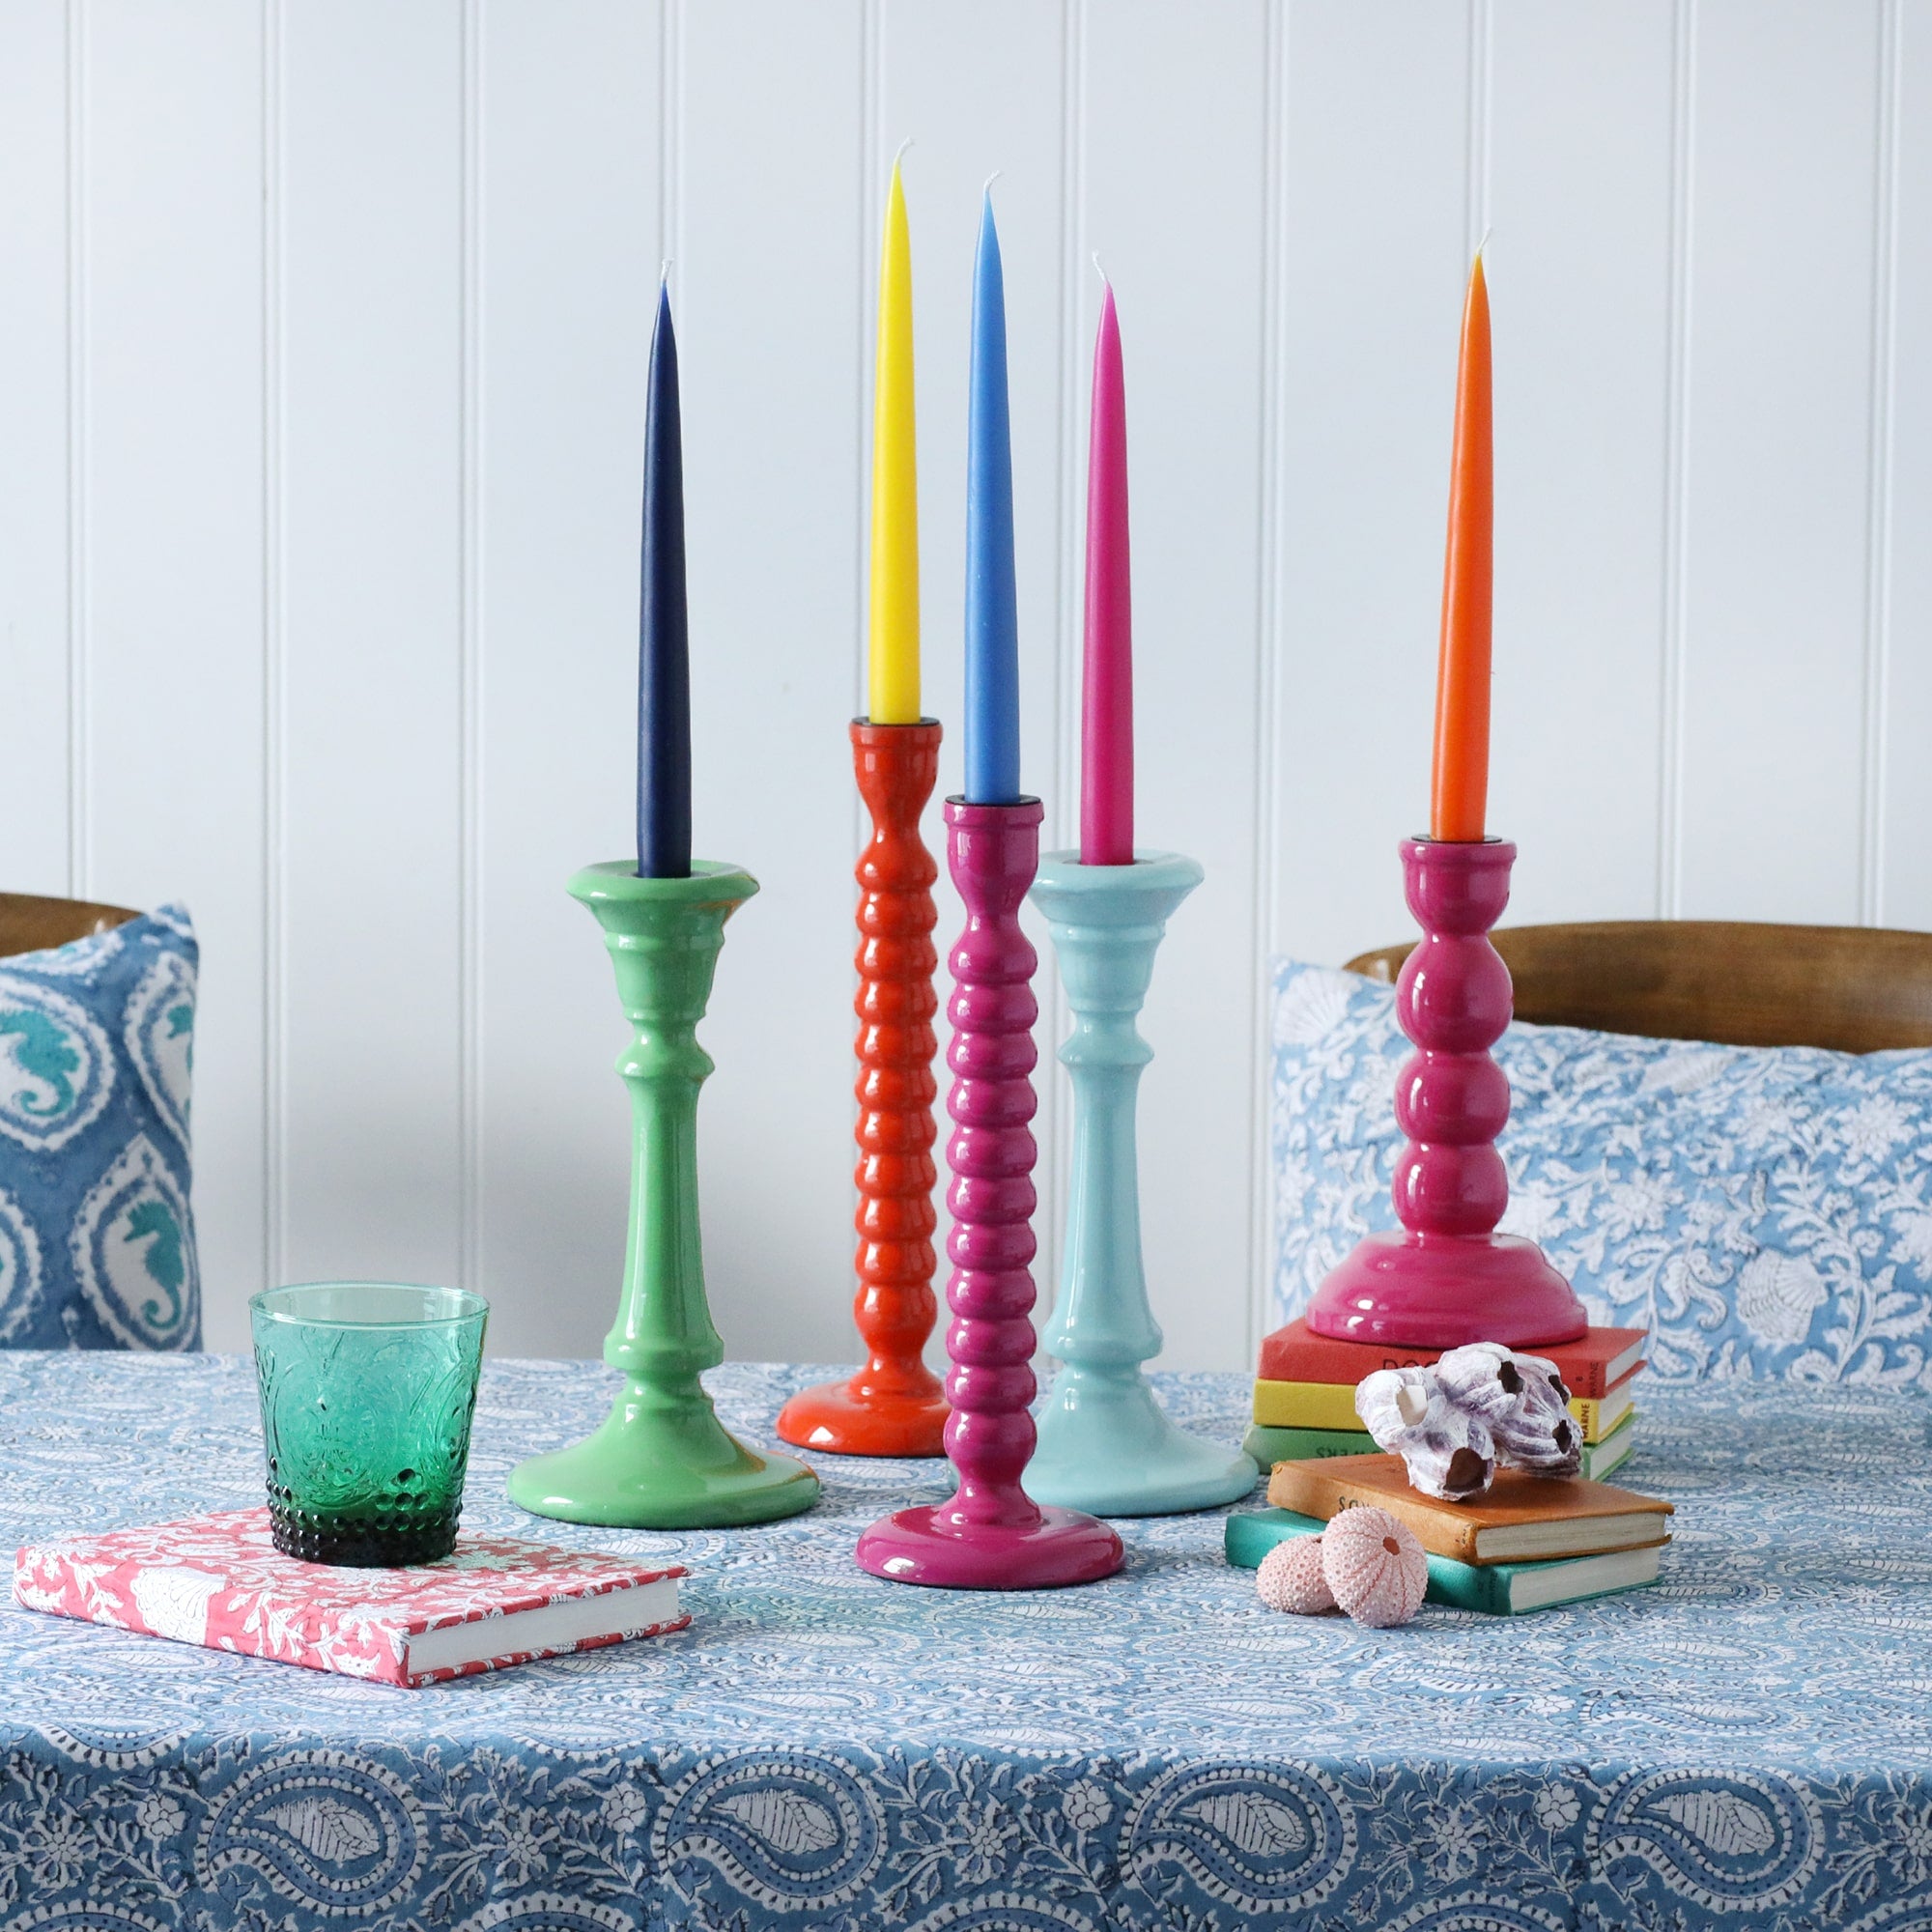 Lacquered candle holders in various colours with contrasting candles.They are placed on our Samudra collection table linens,also on the table is a notebook and a glass.In the background are a couple of chairs with hand blocked painted cushions